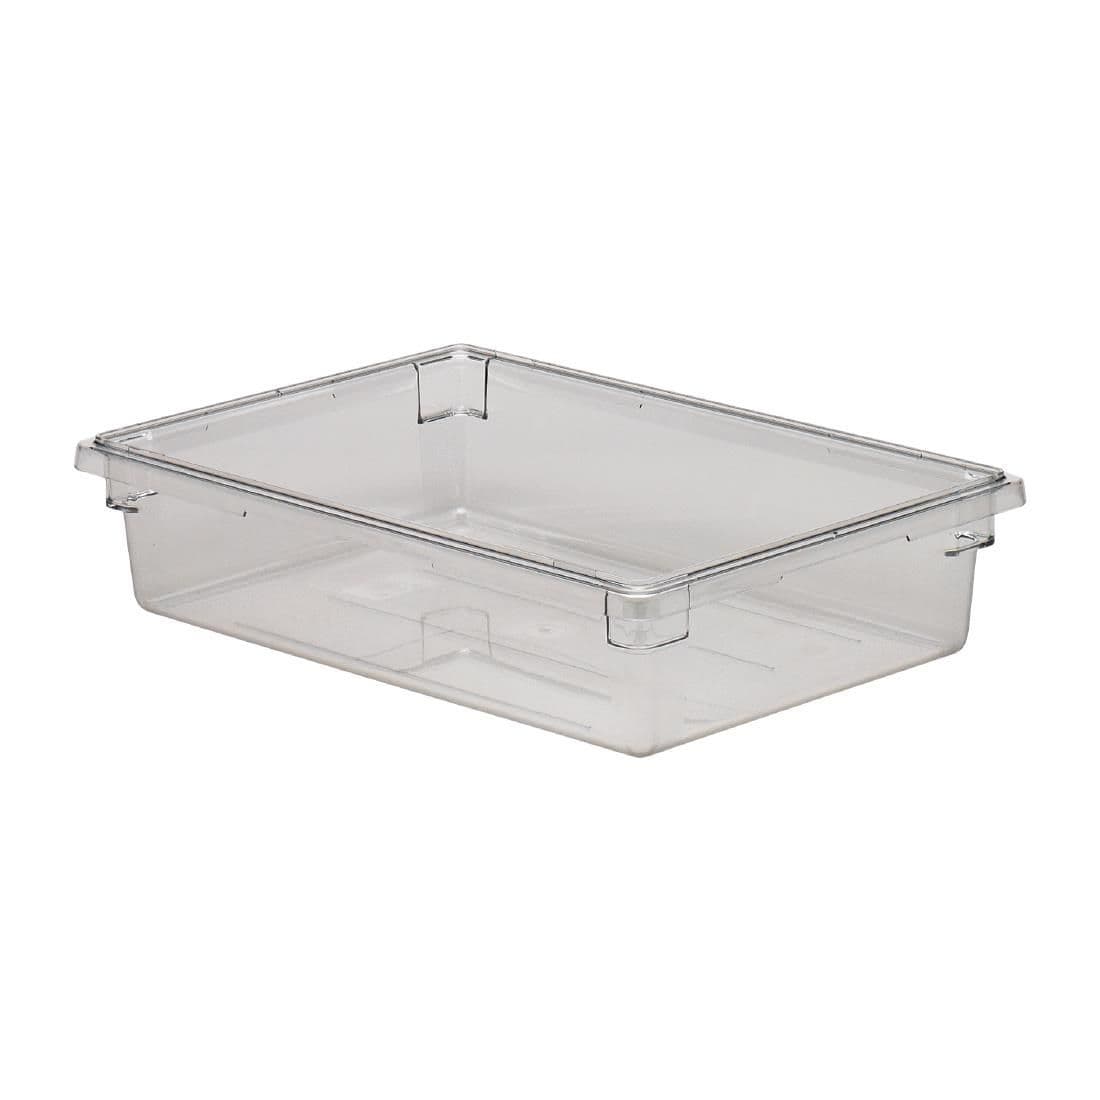 FE733 Cambro Polycarbonate Food Storage Box 33Ltr JD Catering Equipment Solutions Ltd